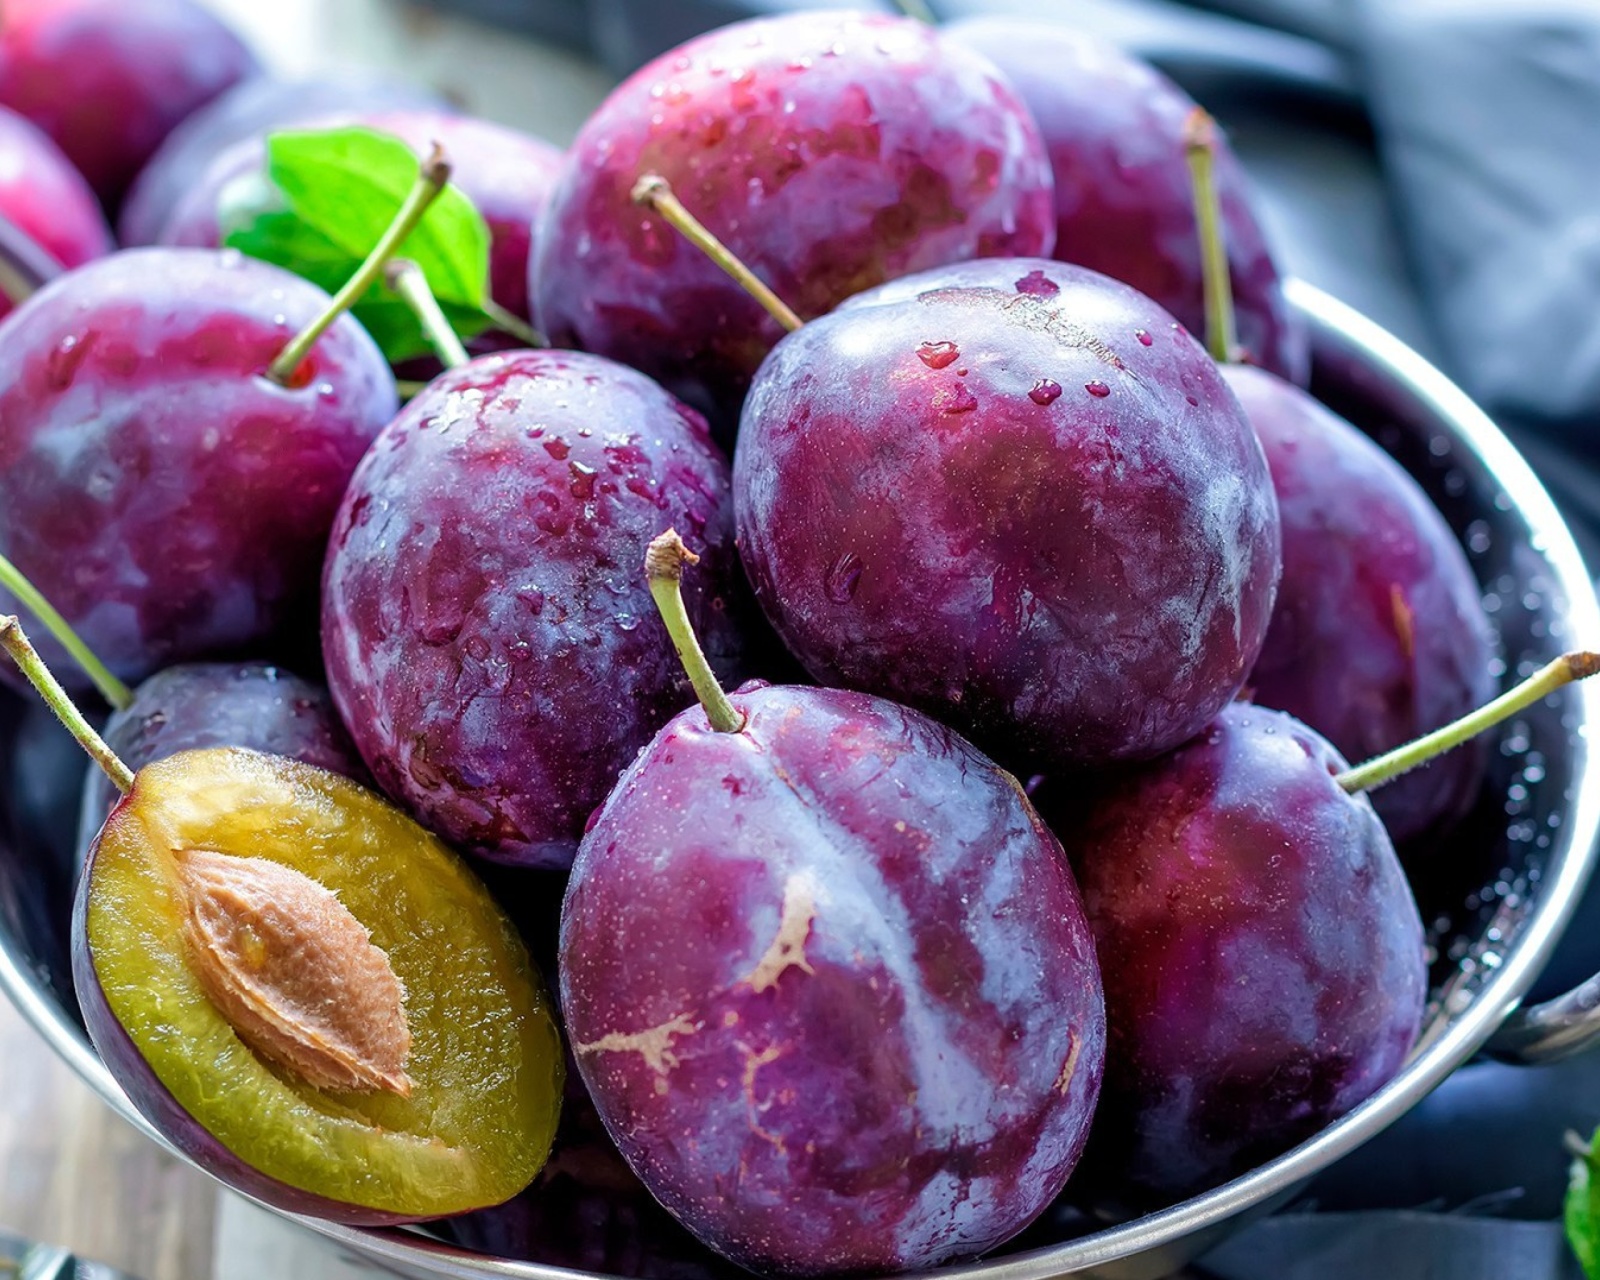 Das Plums with Vitamins Wallpaper 1600x1280